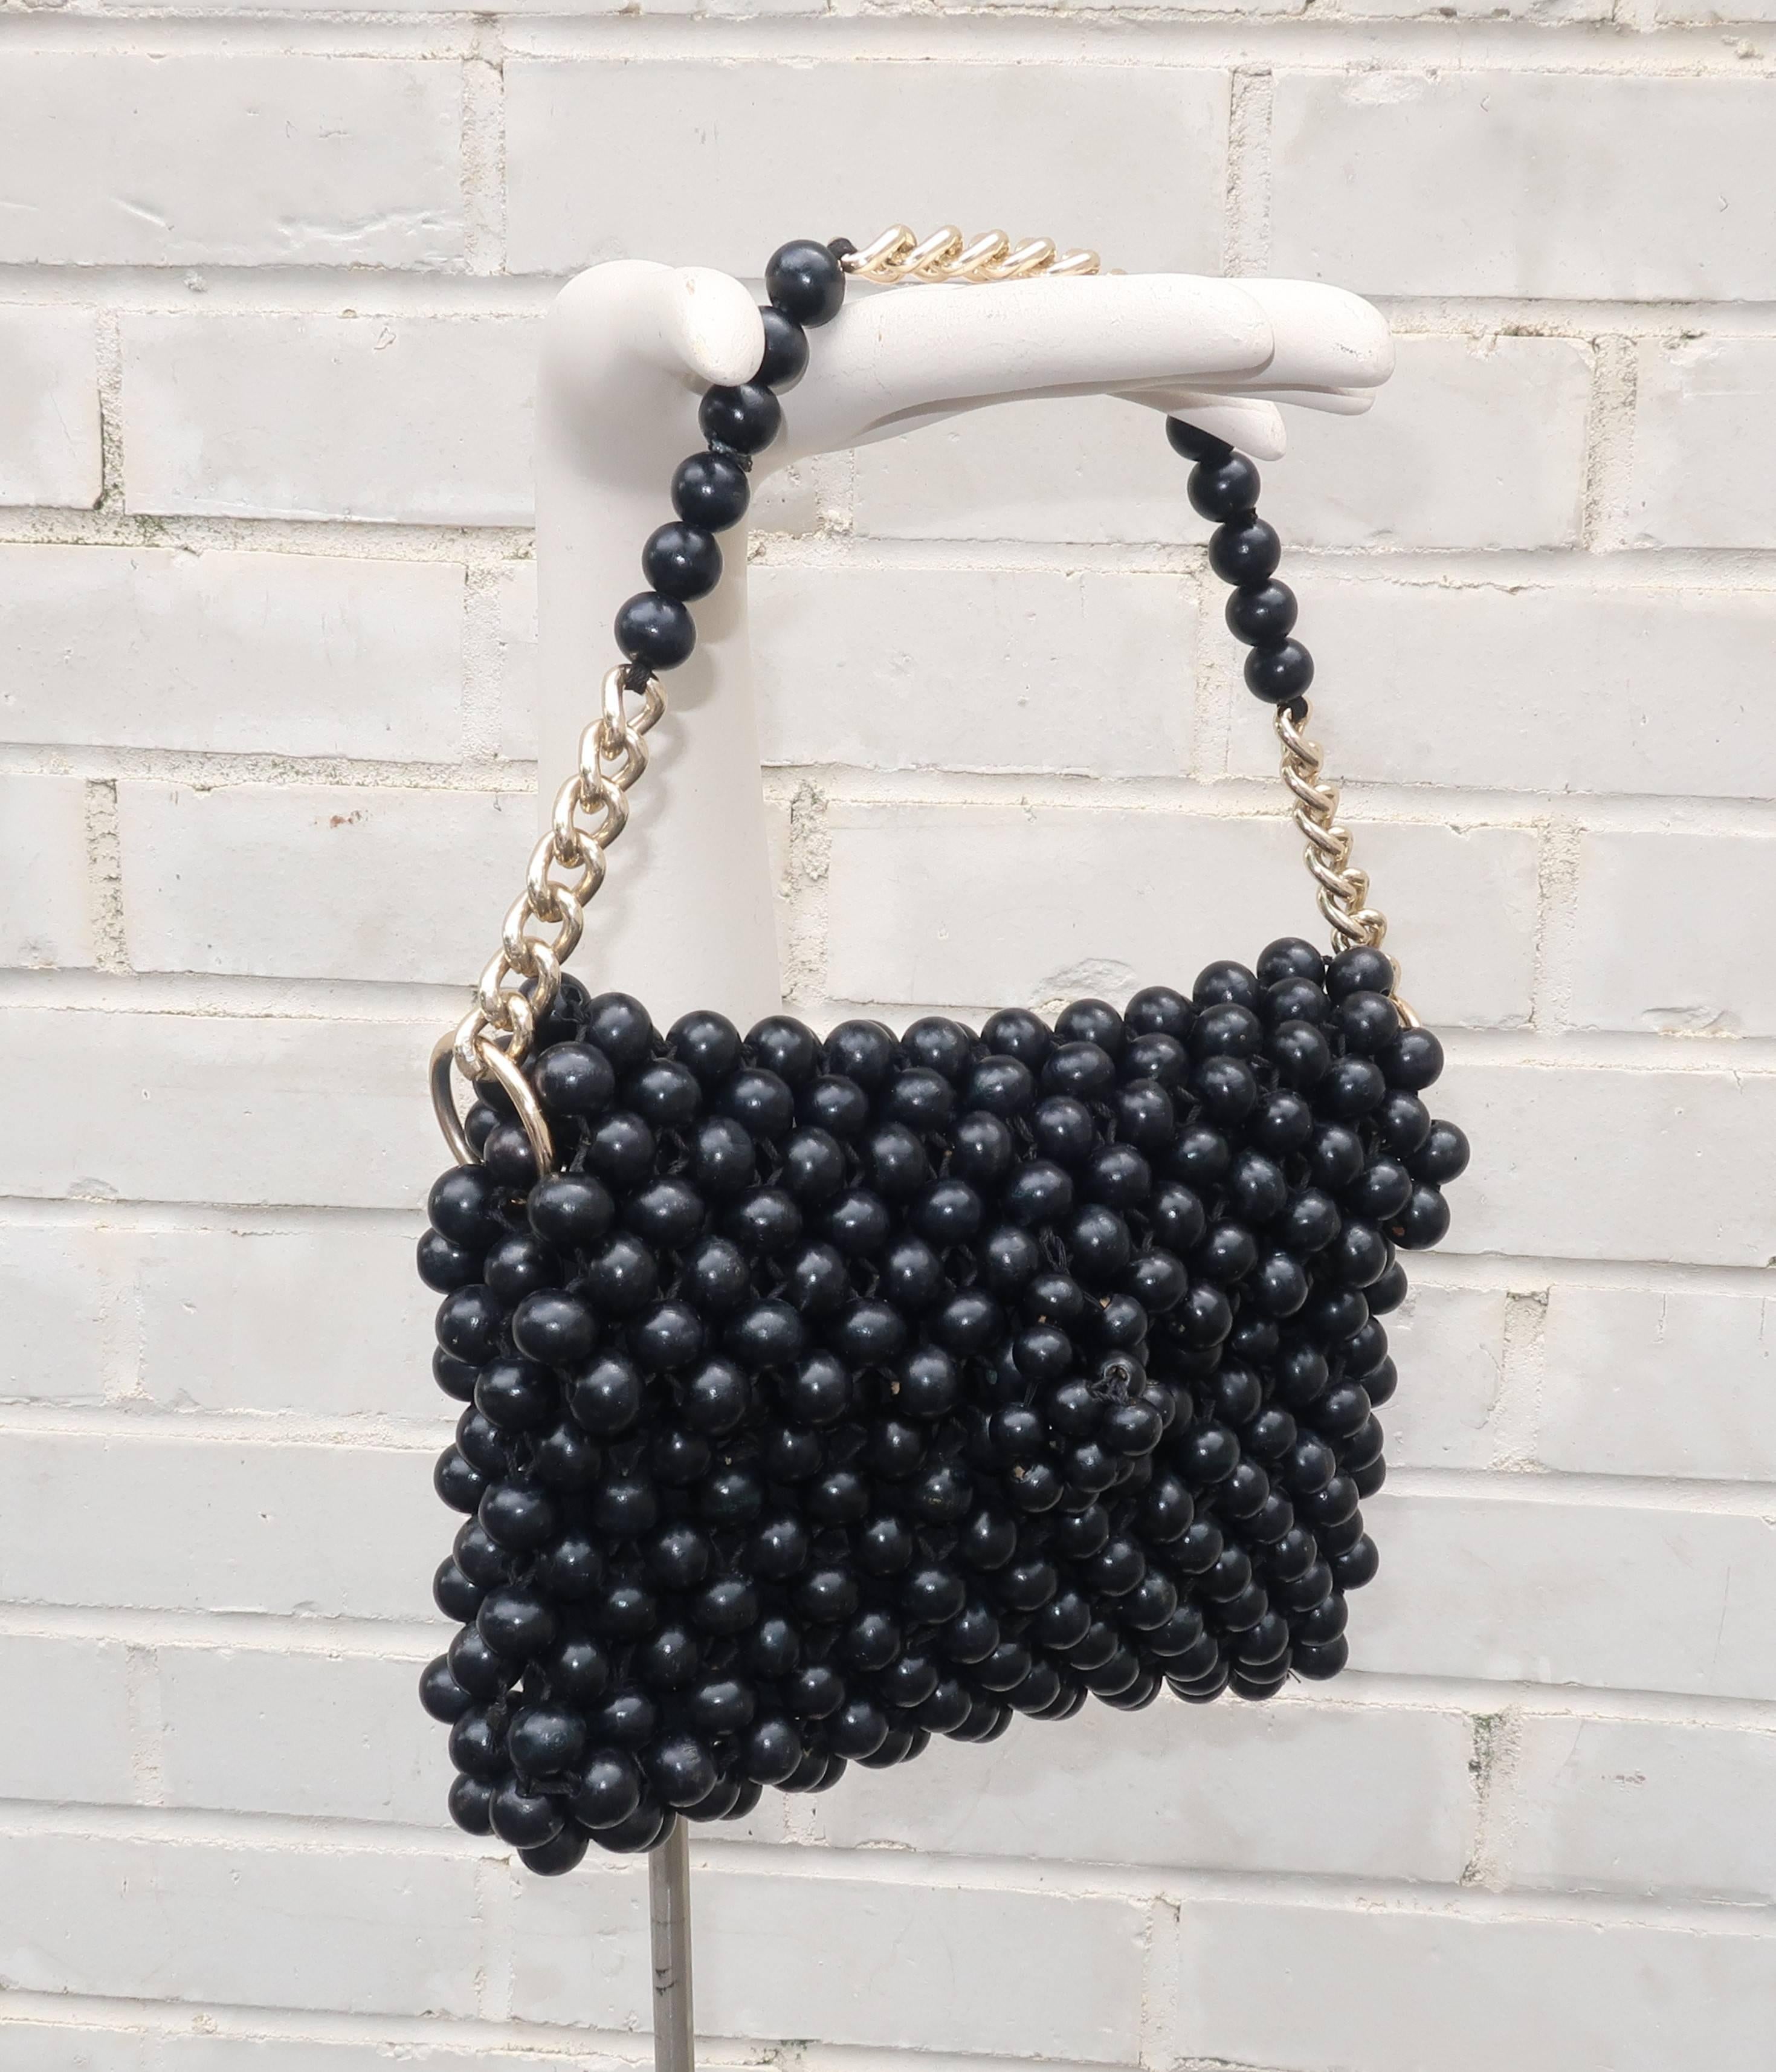 The fun combination of a mod aesthetic and bohemian look gives this Japanese 1960's black wood bead handbag with gold tone chain link handle a period perfect vibe.  The front flap secures with an elasticized closure and the fabric lined interior